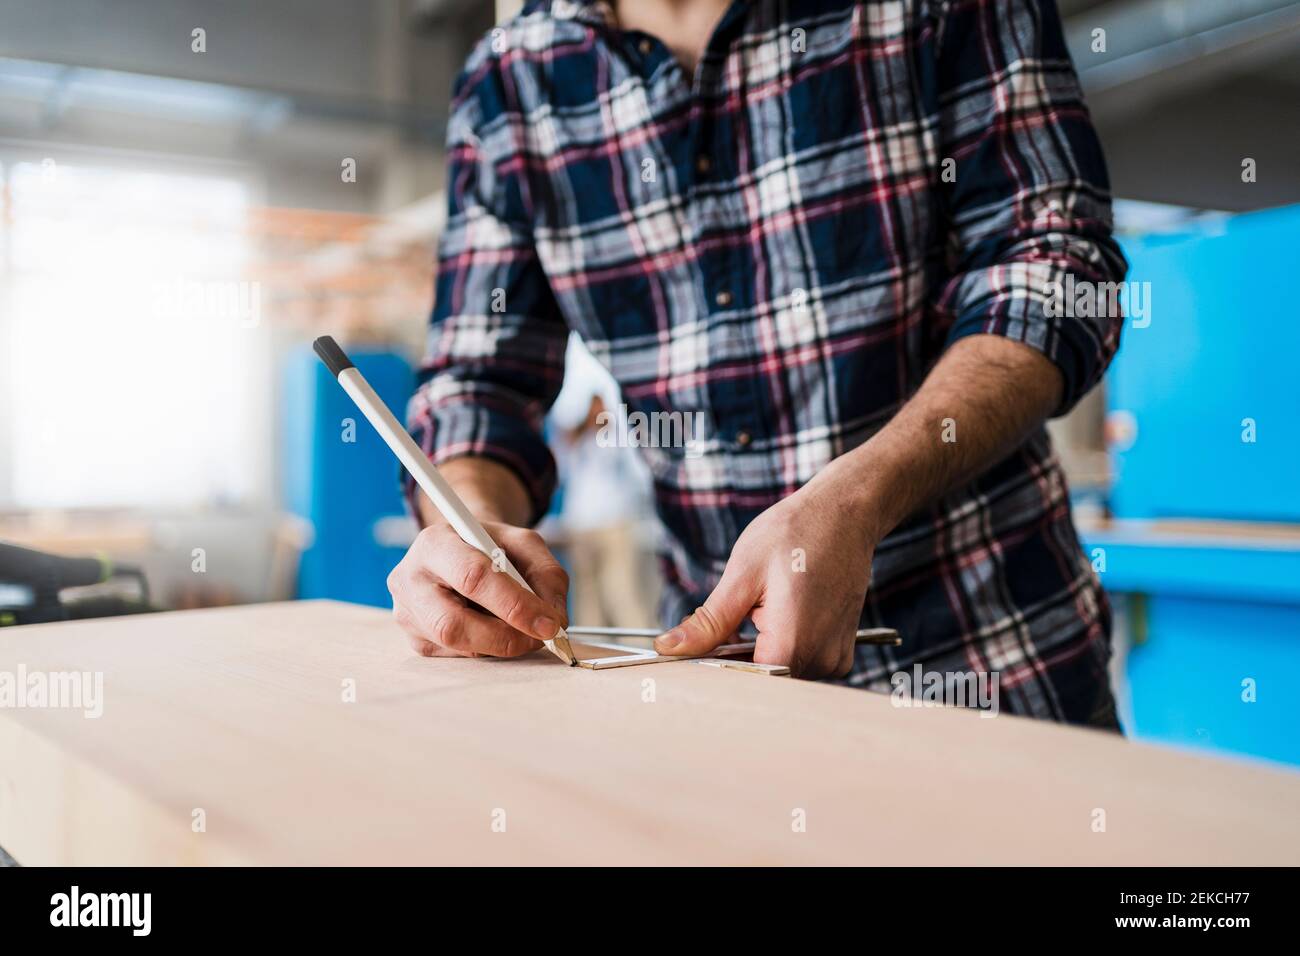 Manual worker measuring wood while working at industry Stock Photo